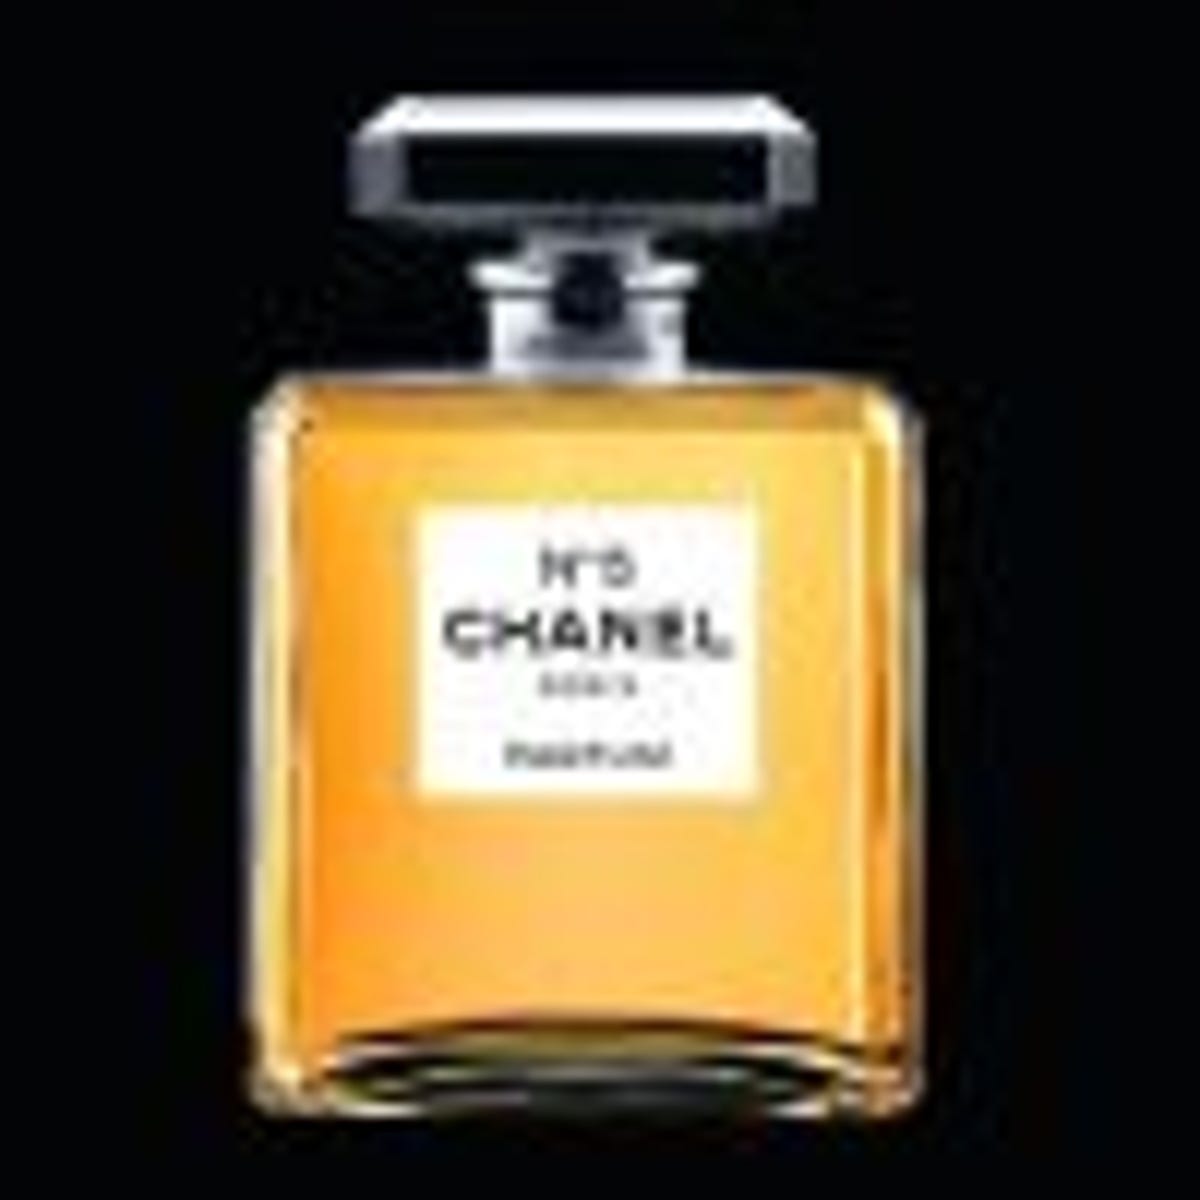 From brand to icon: Chanel No.5 on display in Paris